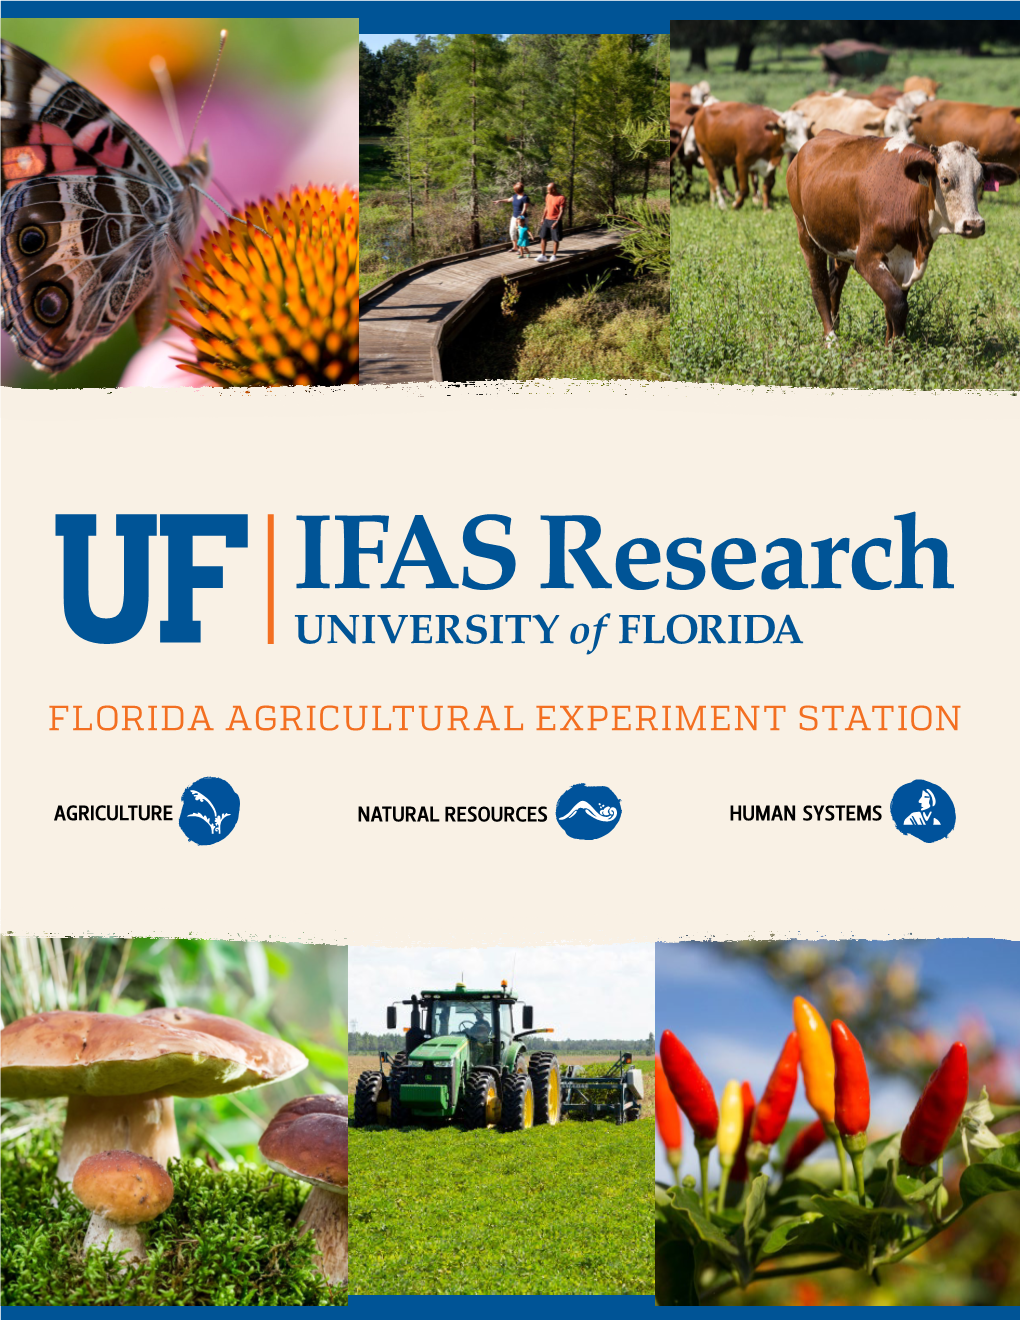 Florida Agricultural Experiment Station